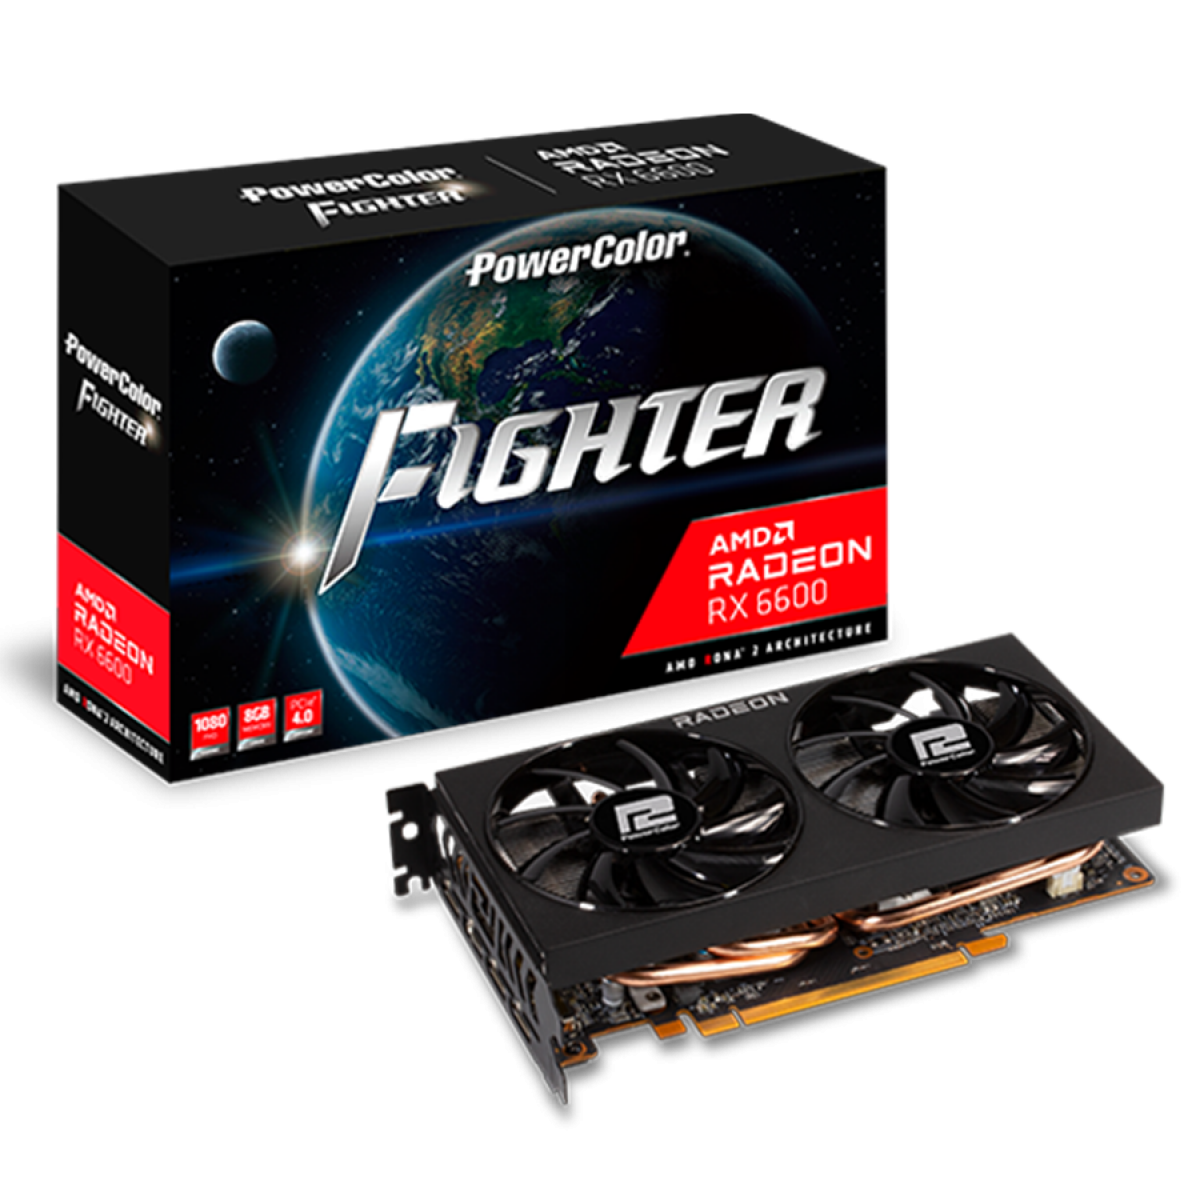 RX 6600 8GB POWERCOLOR FIGHTER 